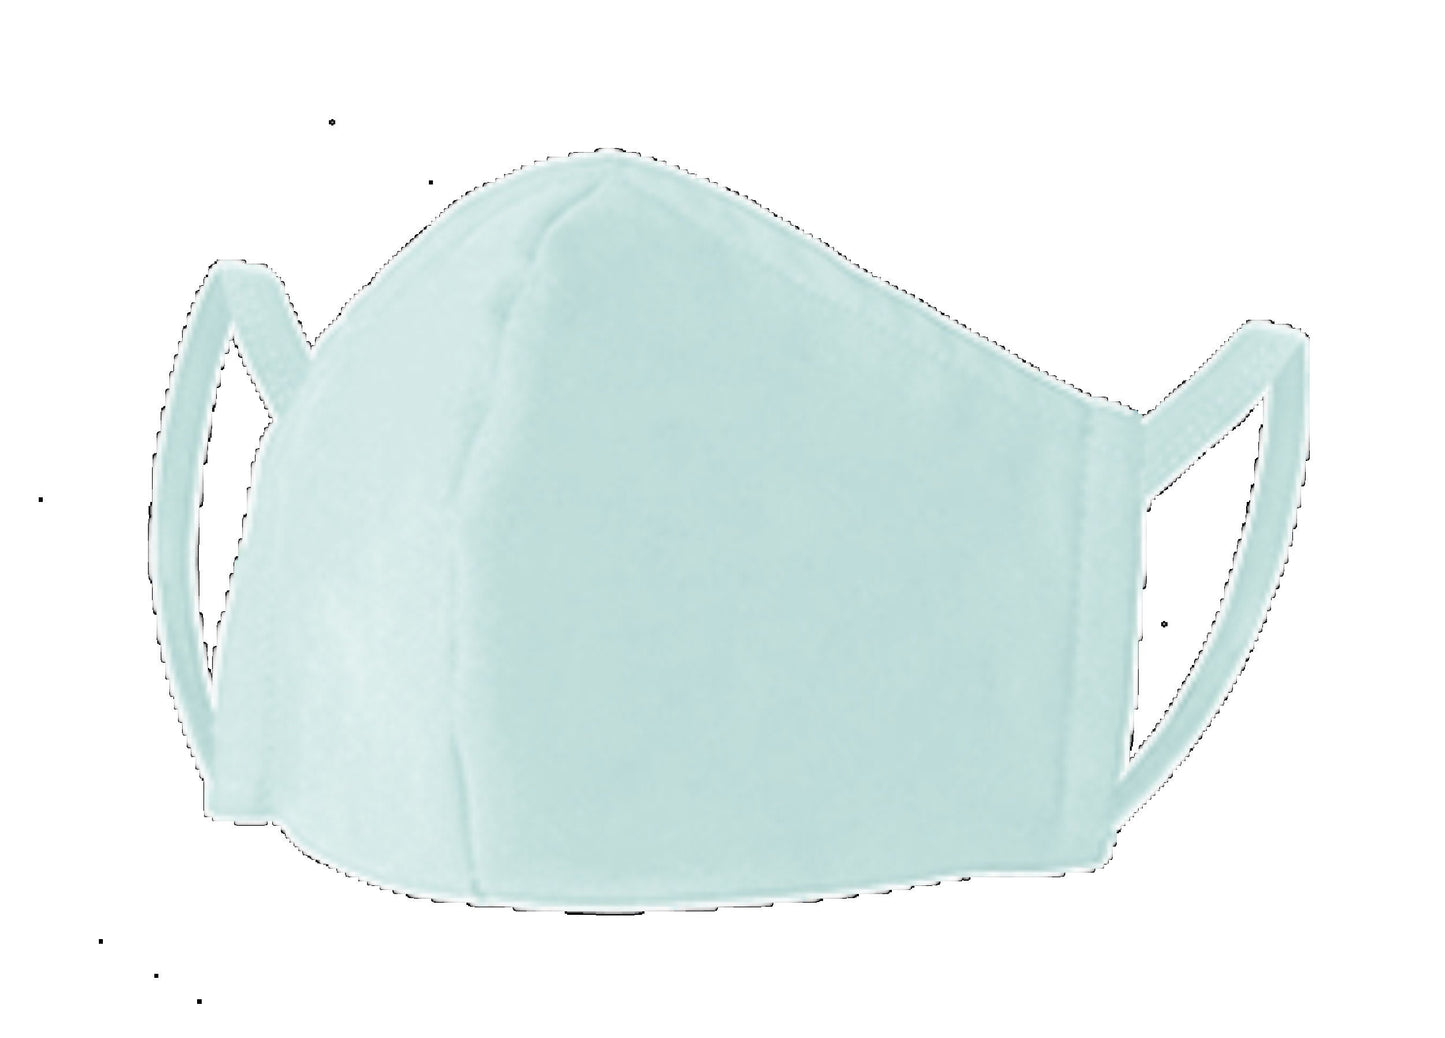 Face Mask, Amor. Gift for Her, Lover, Love, Stay Safe, Reusable, Washable, Cute Saying, Ice Blue, Comfortable